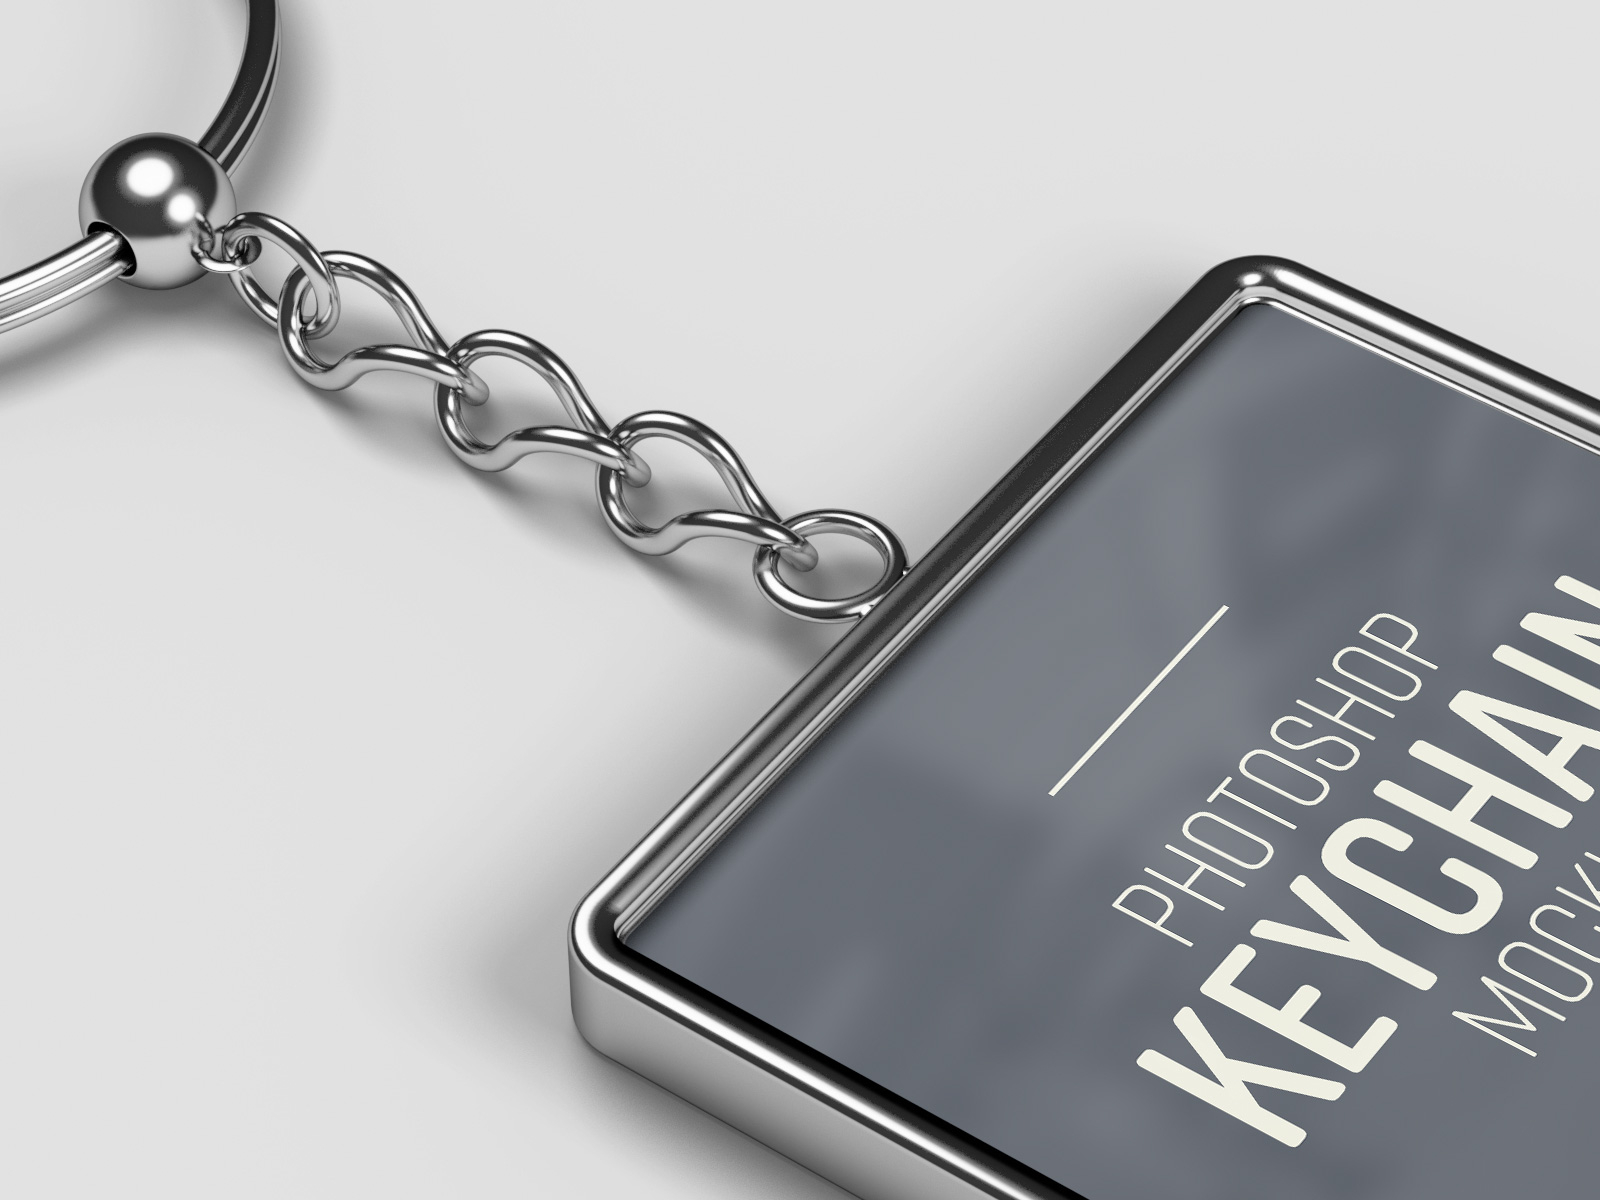 Download Rounded Square Keychain Mockup by Diego Sanchez for Medialoot on Dribbble